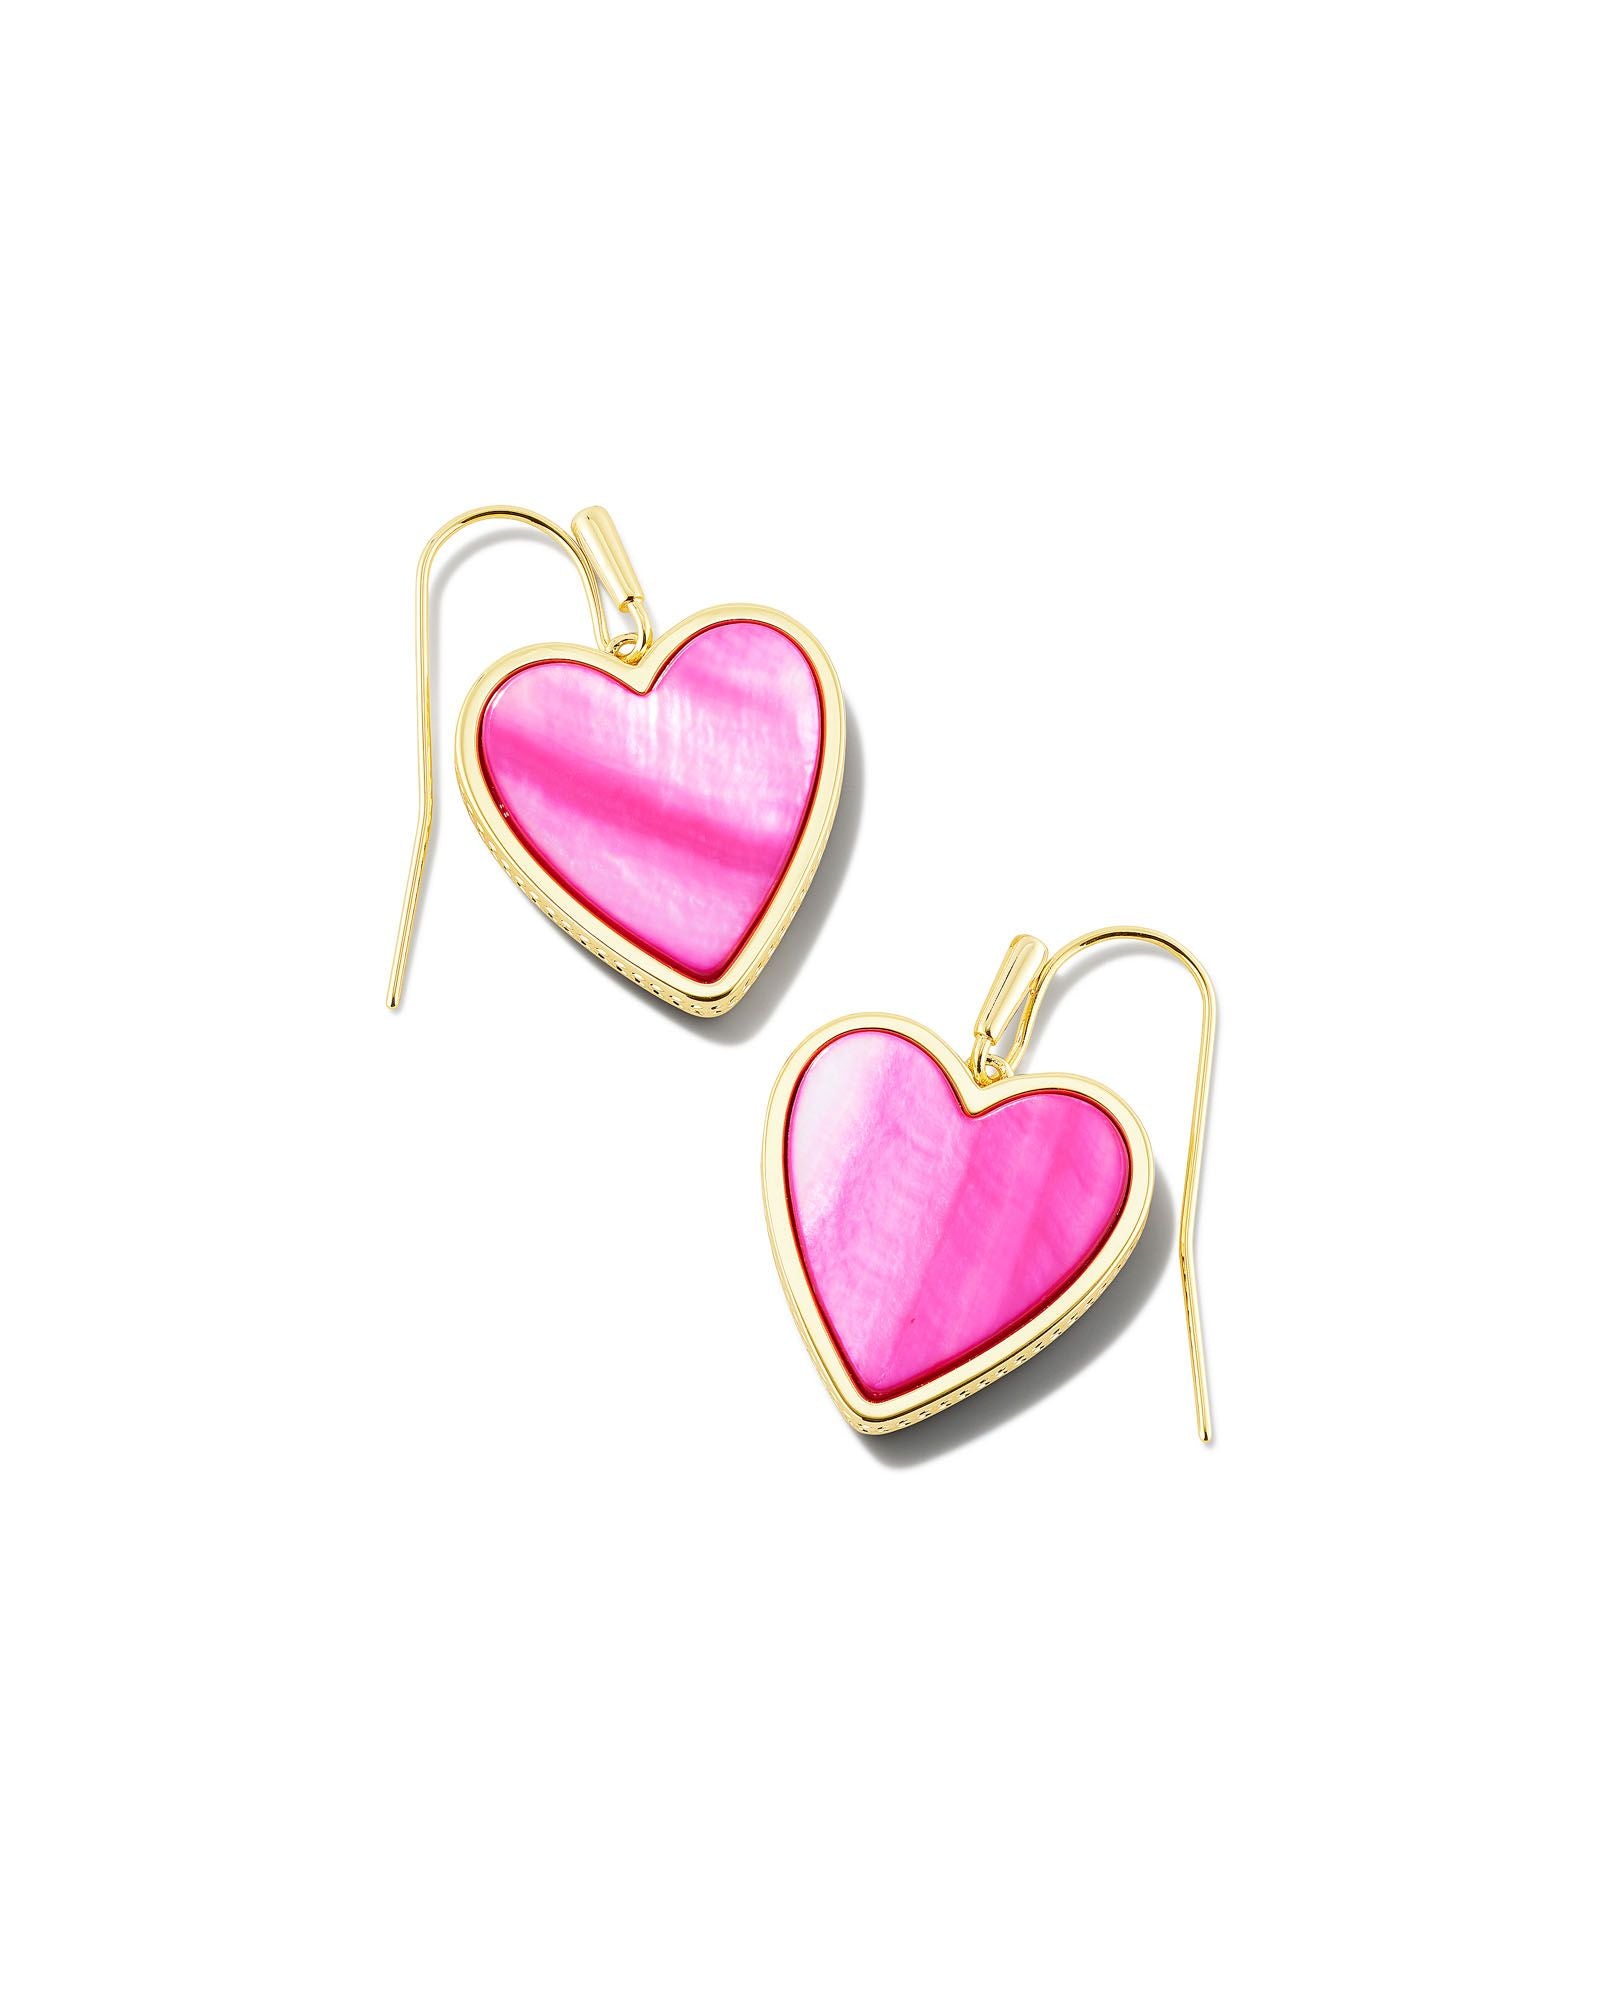 Kendra Scott | Heart Gold Drop Earrings in Hot Pink Mother of Pearl - Giddy Up Glamour Boutique